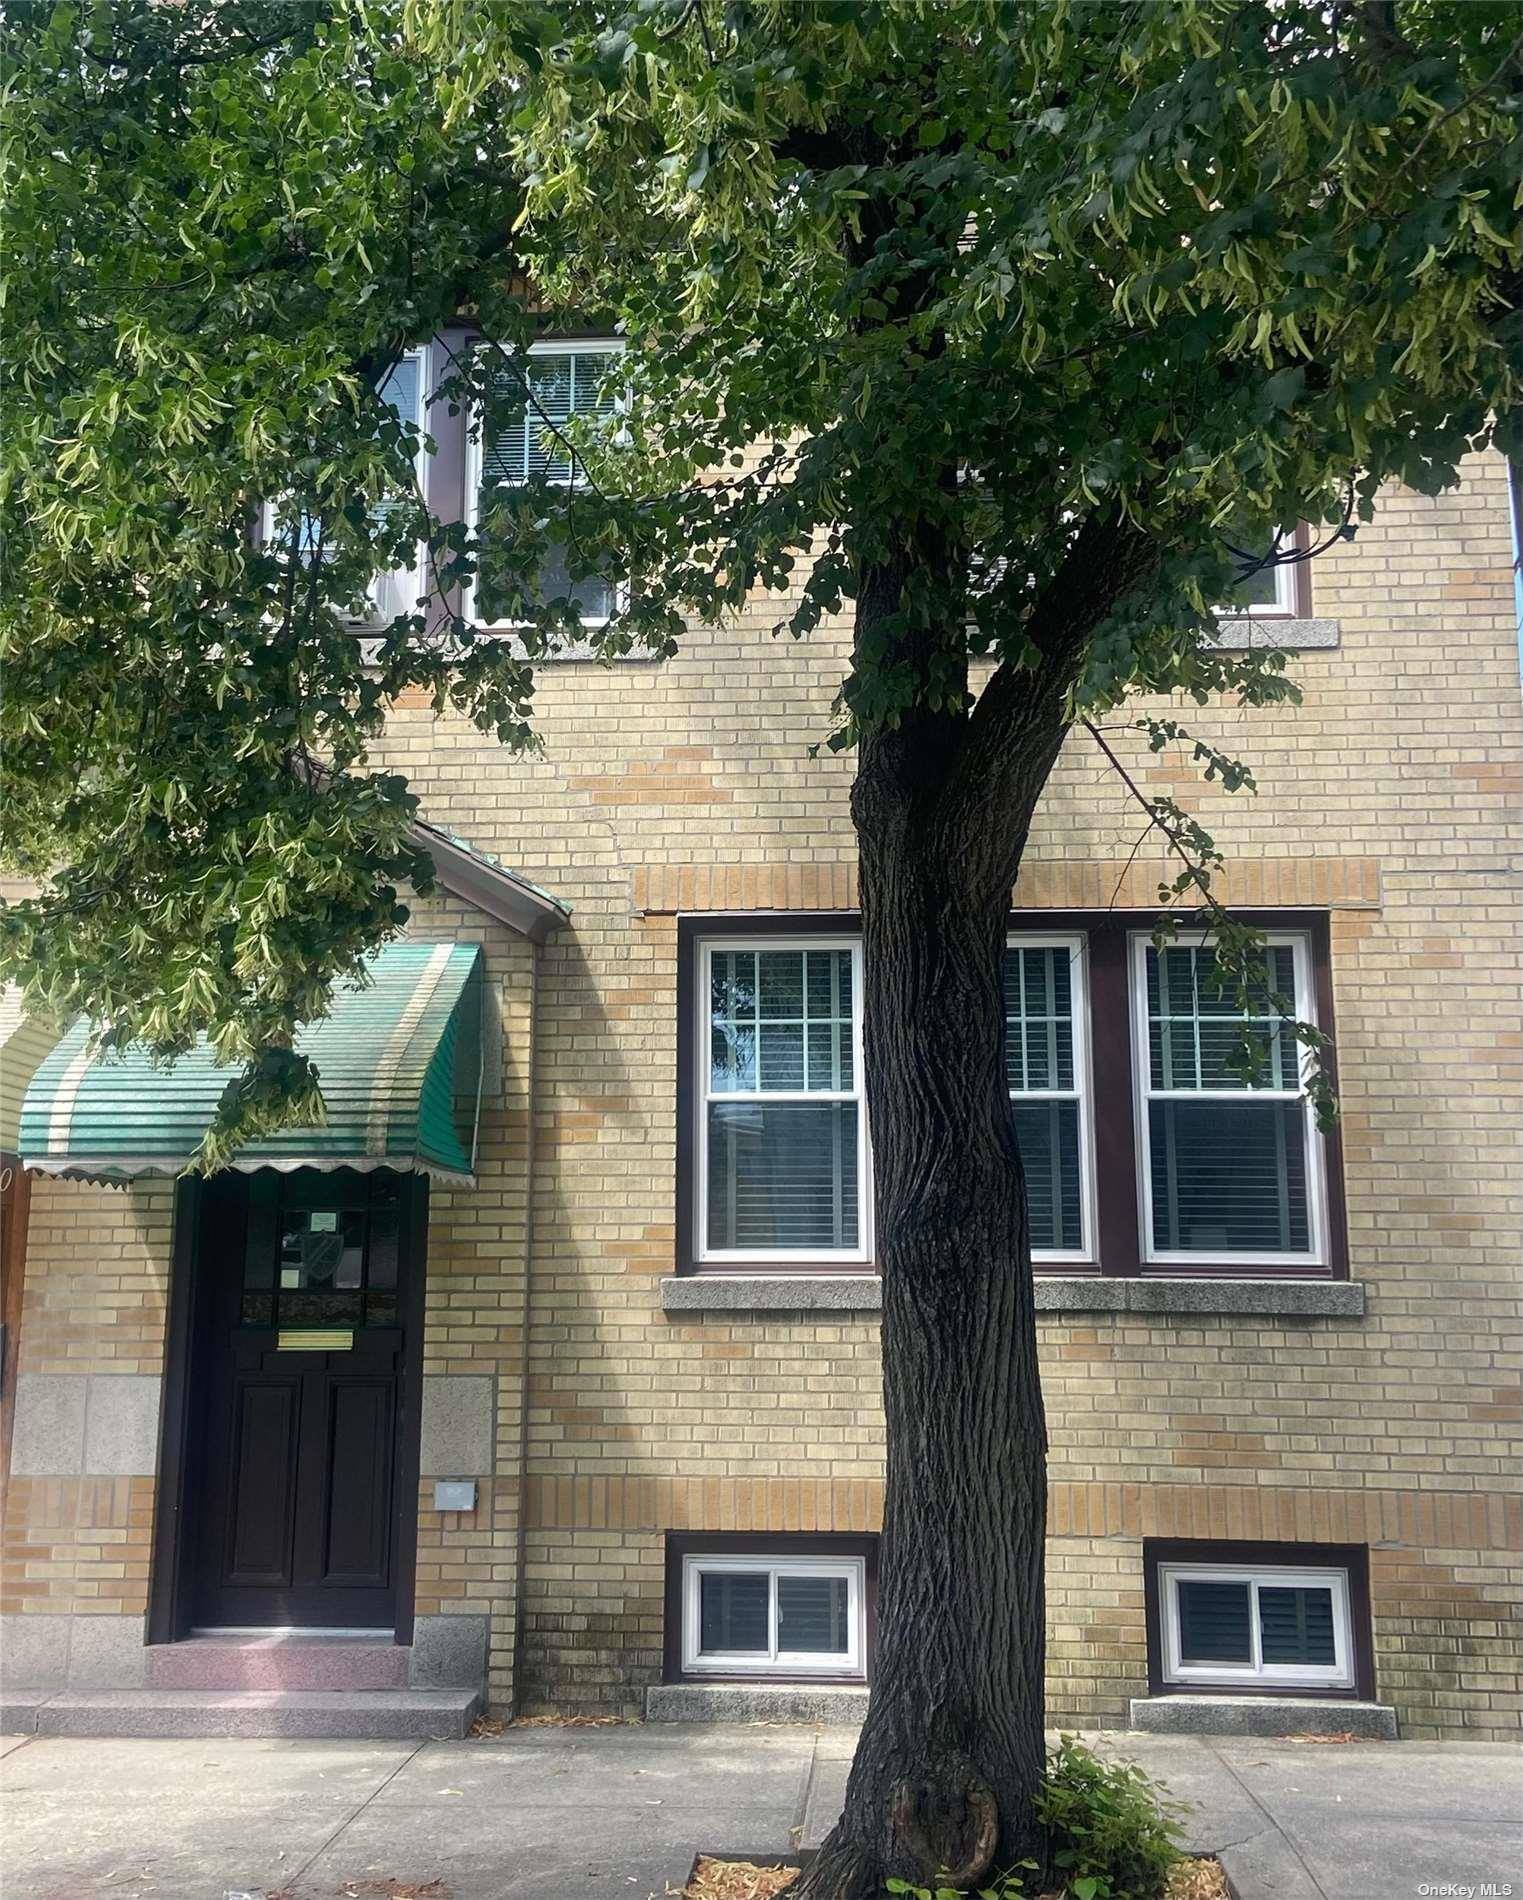 3 Family Brick Home on a beautiful Tree Lined Block in the desirable area of Glendale with a detached 3 car garage.